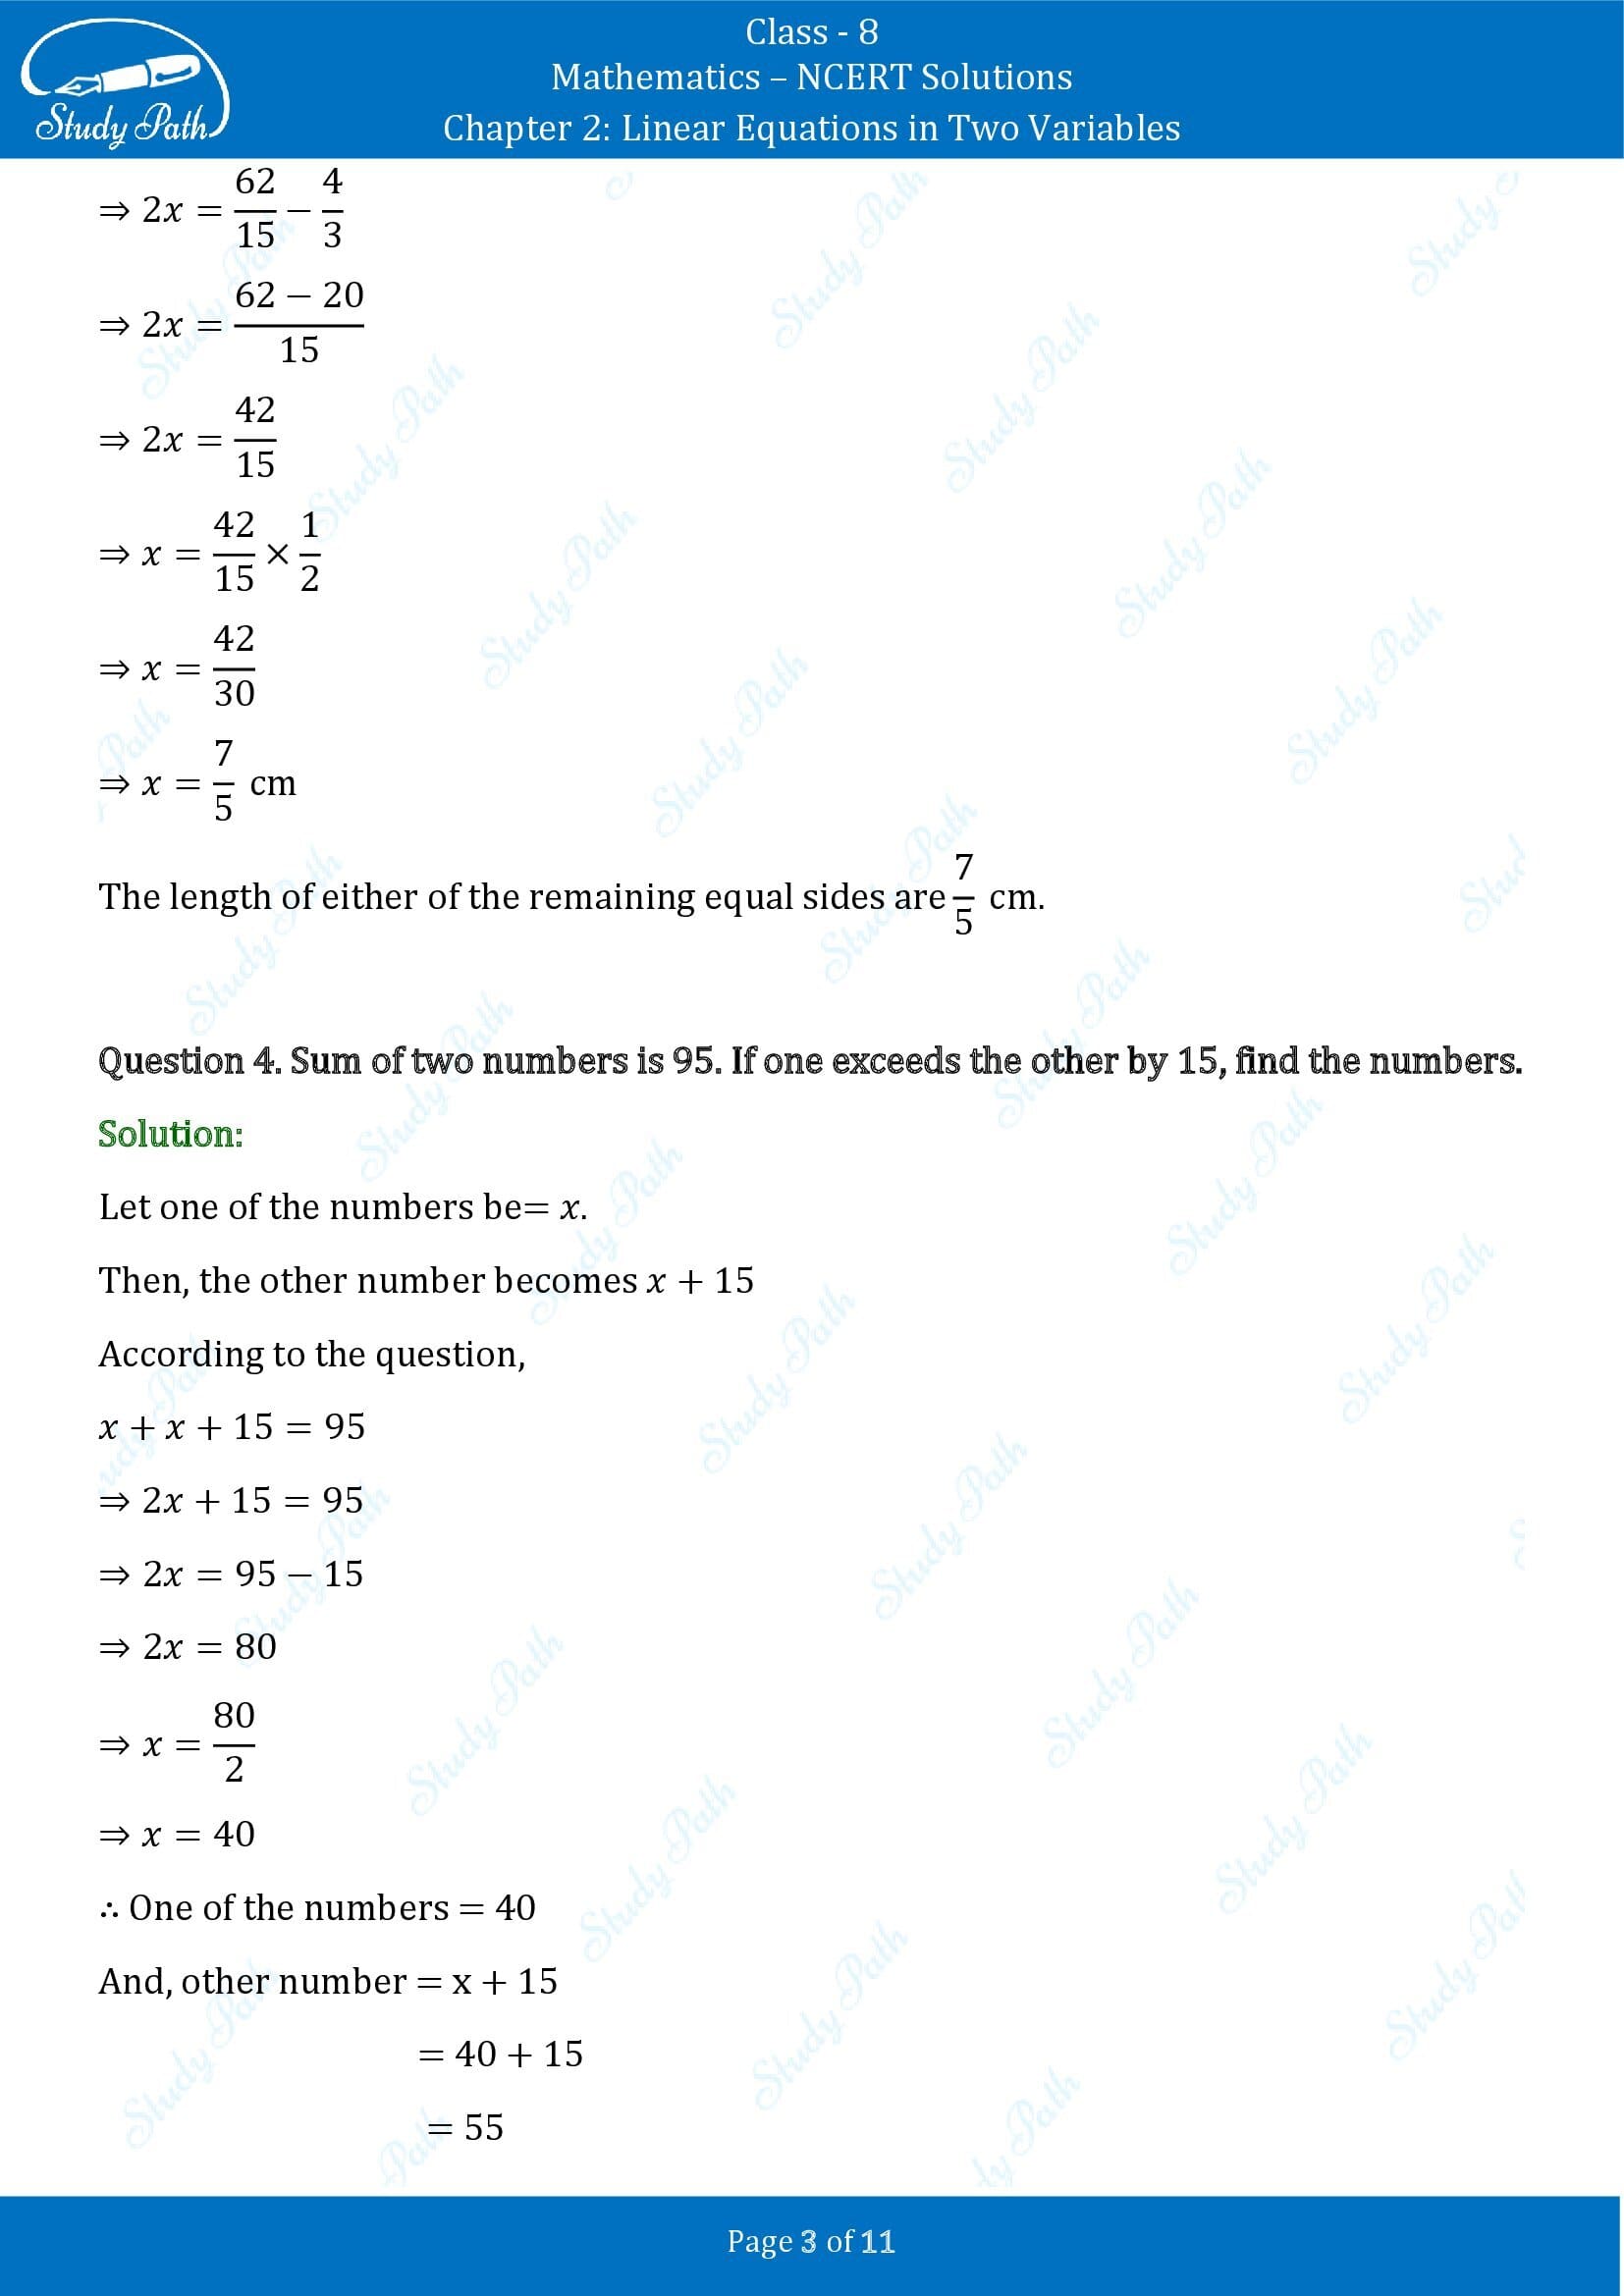 NCERT Solutions for Class 8 Maths Chapter 2 Linear Equations in Two Variables Exercise 2.2 00003